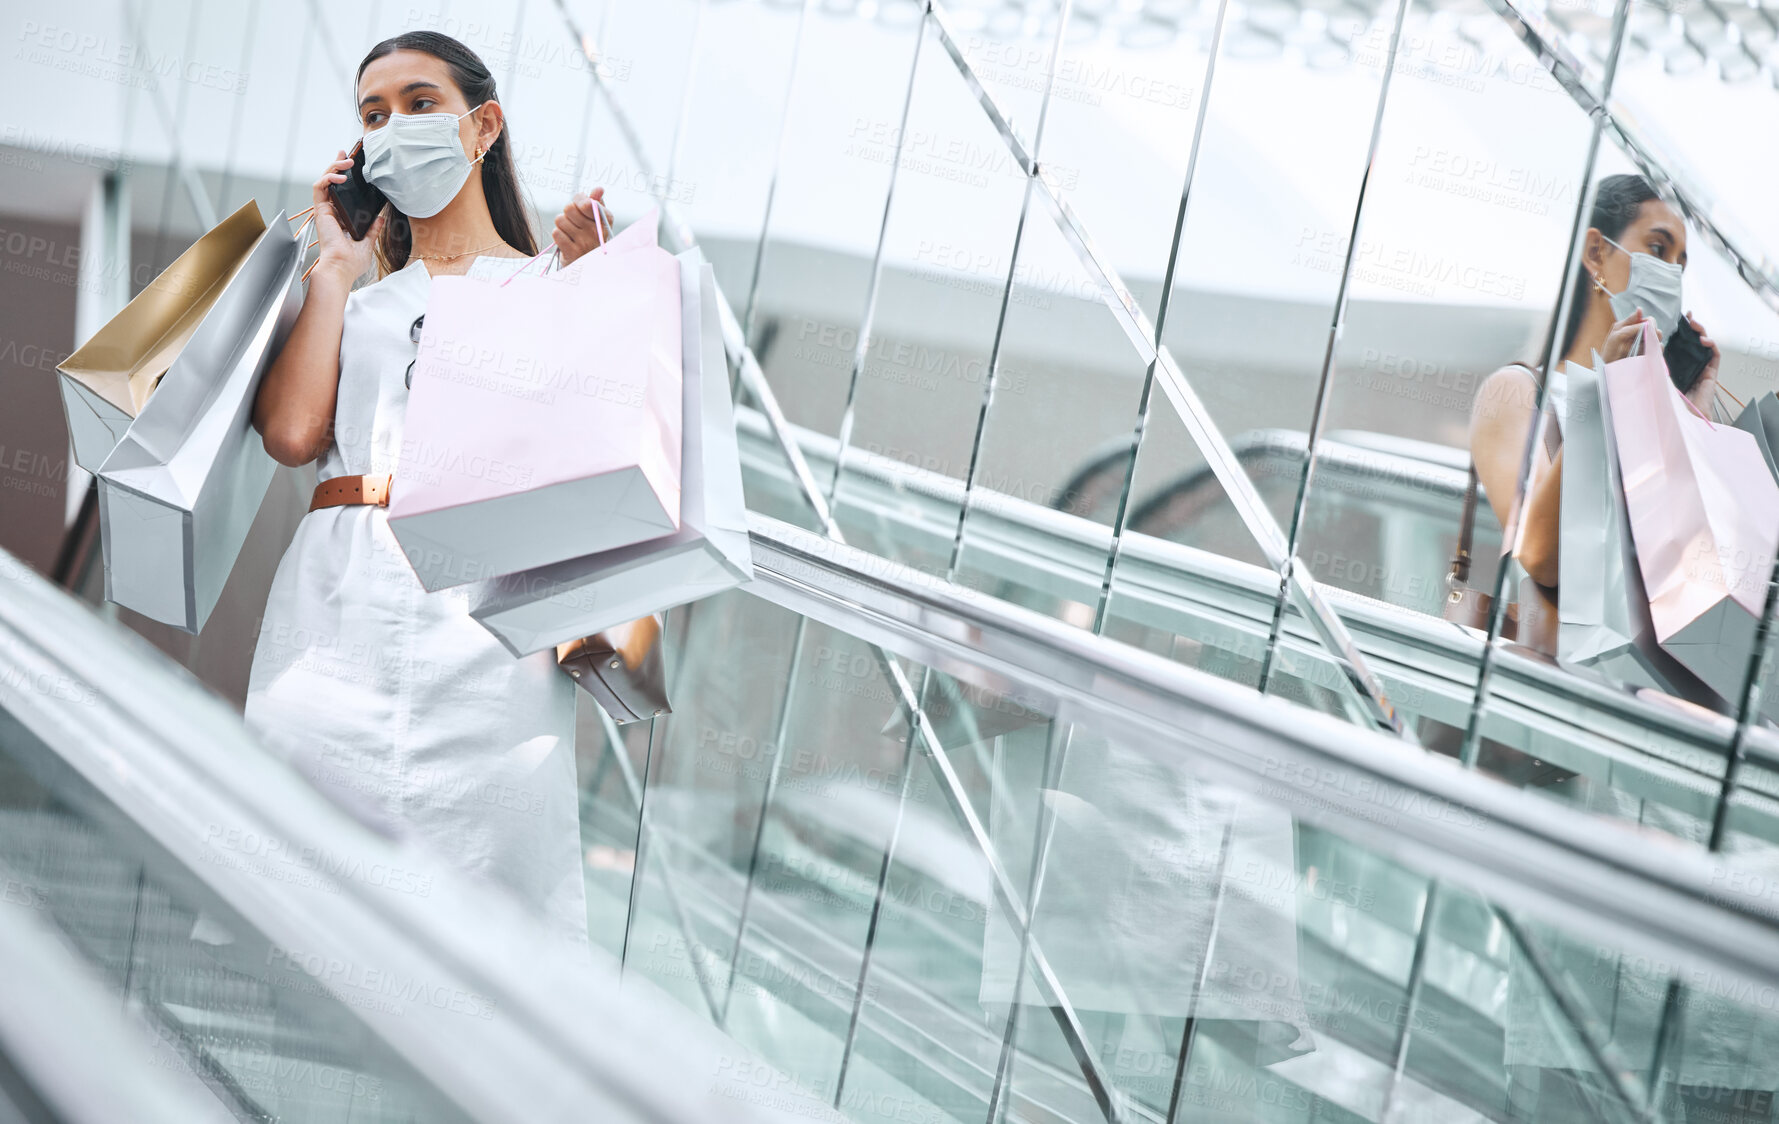 Buy stock photo One young mixed race woman wearing a medical face mask for prevention against coronavirus and talking on a cellphone while on an escalator after a shopping spree. Hispanic woman carrying retail bags in a mall during Covid-19 pandemic